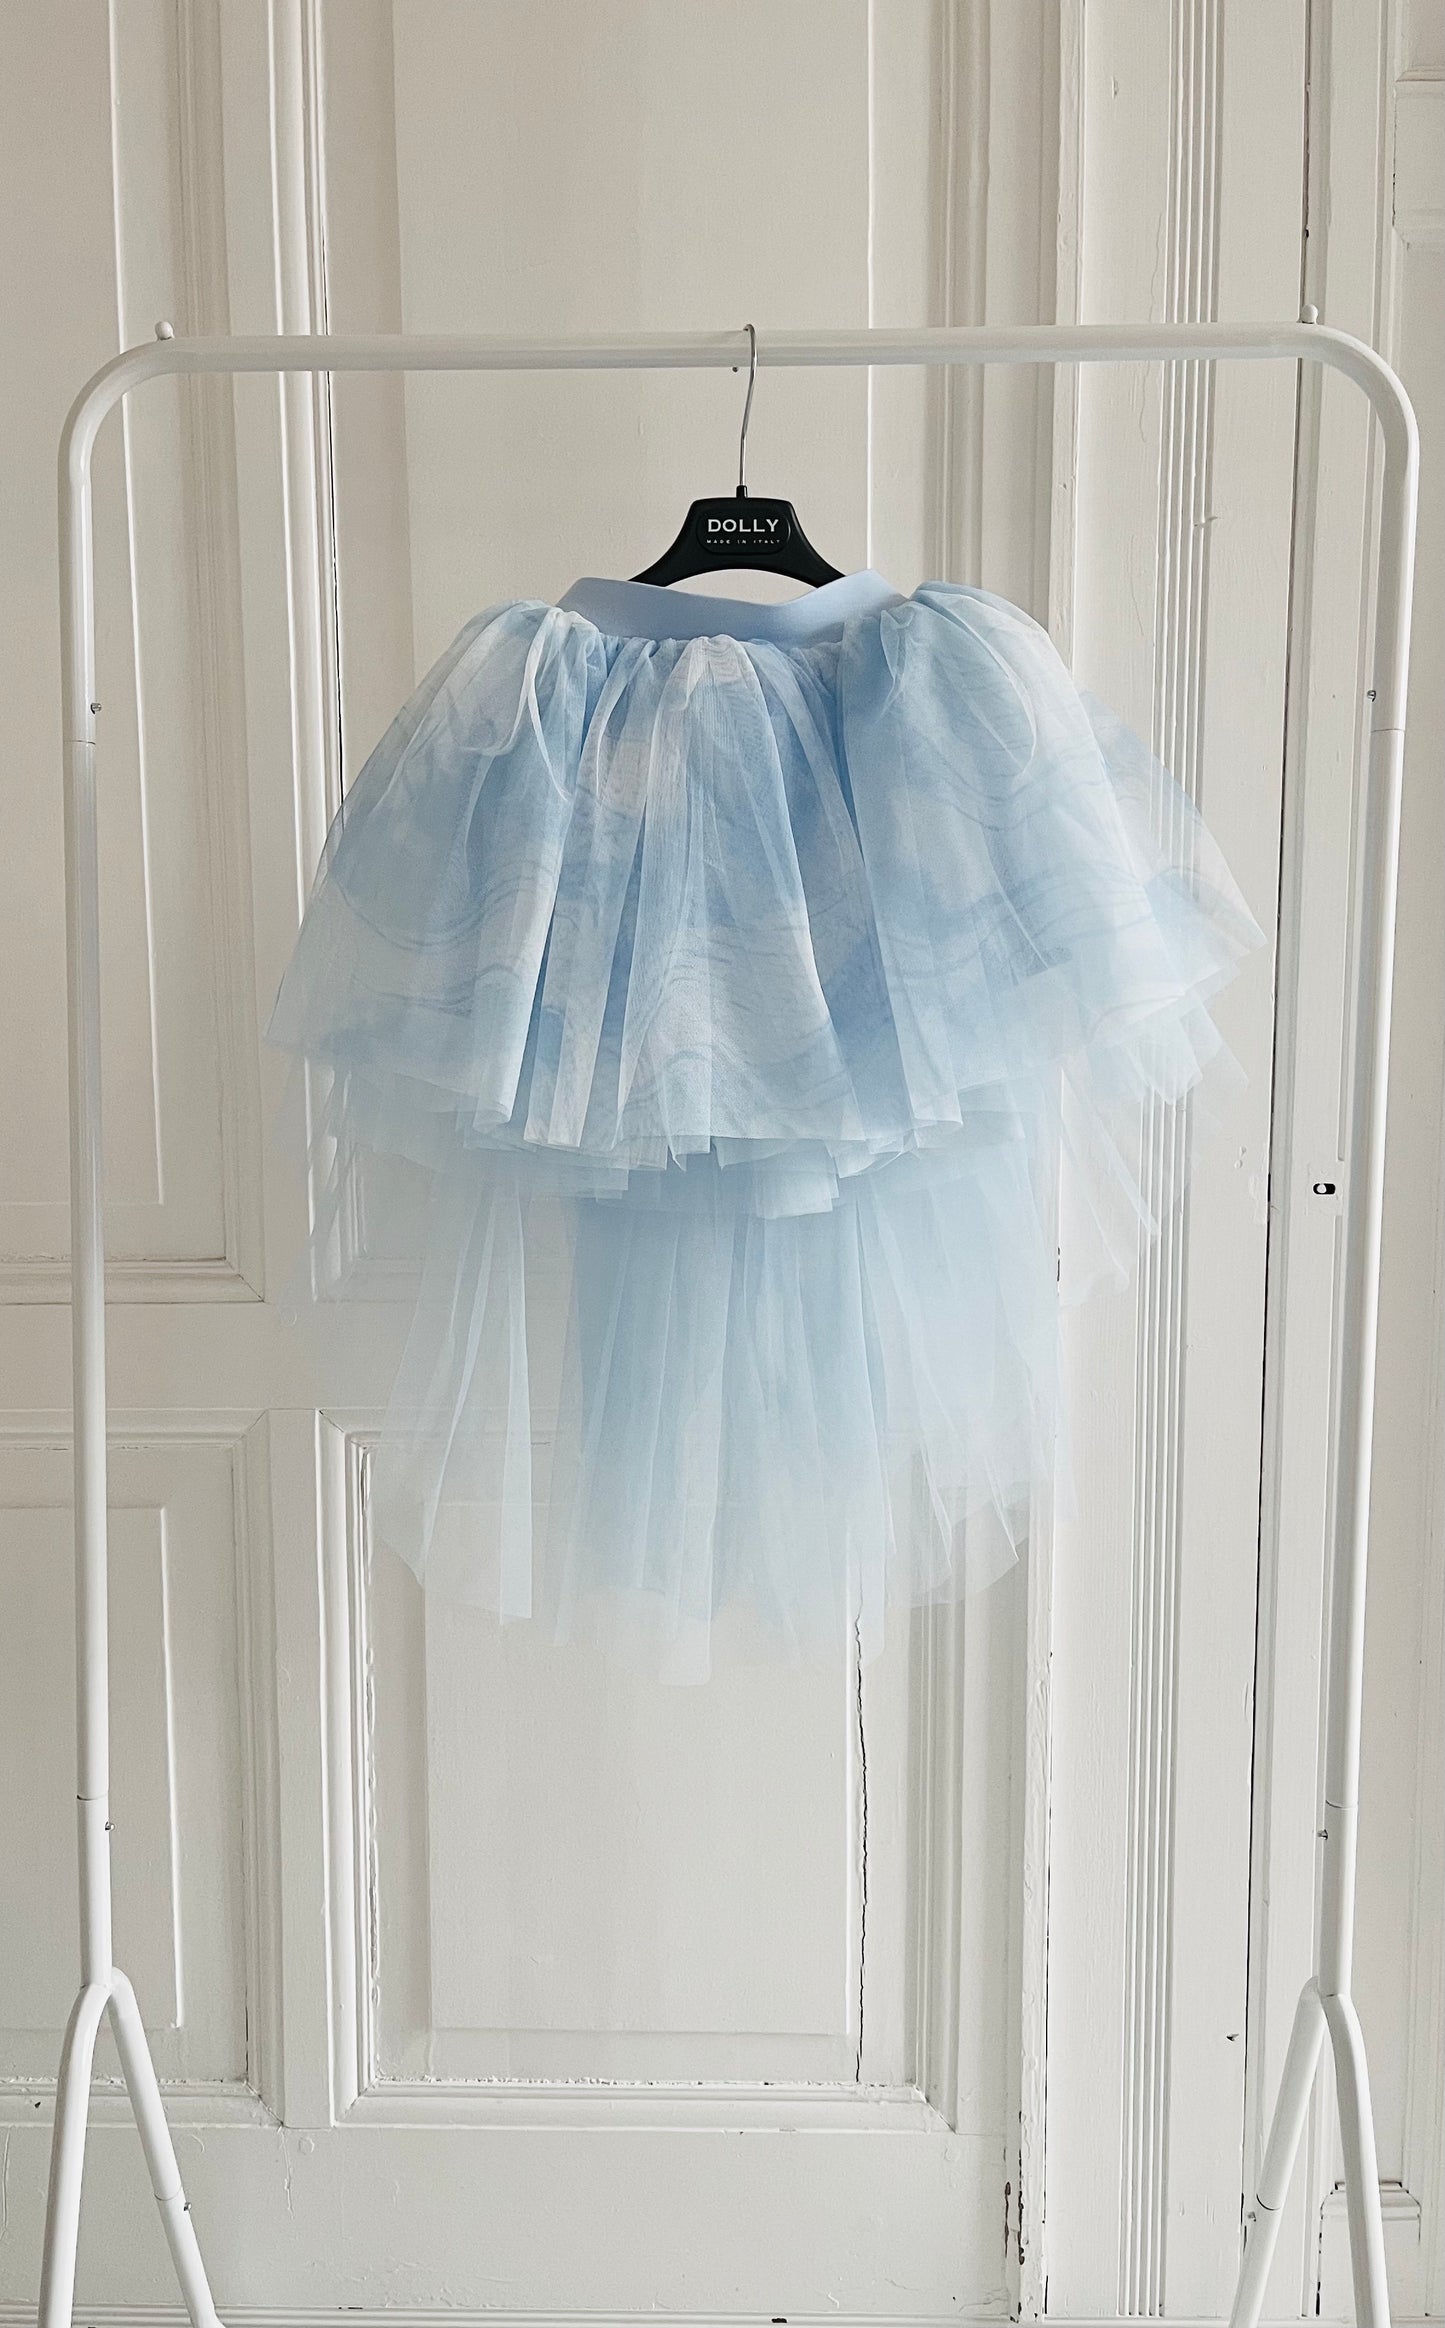 DOLLY® DREAMY DANCING CLOUDS HIGH-LOW TUTU SKIRT blue clouds ☁️